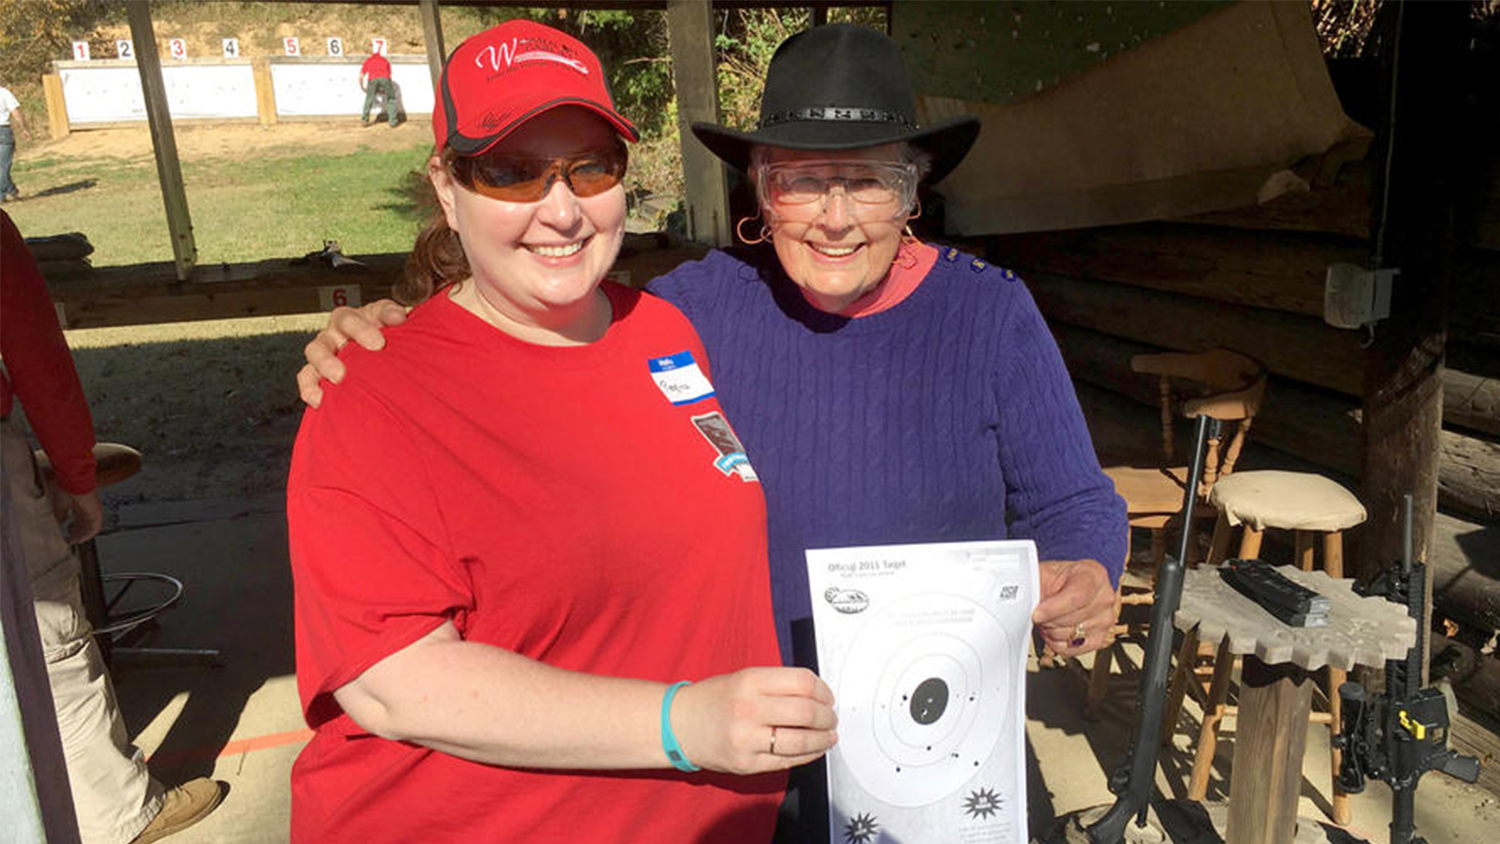 NRA’s Women On Target Program Helps Introduce Local Women to Recreational Shooting